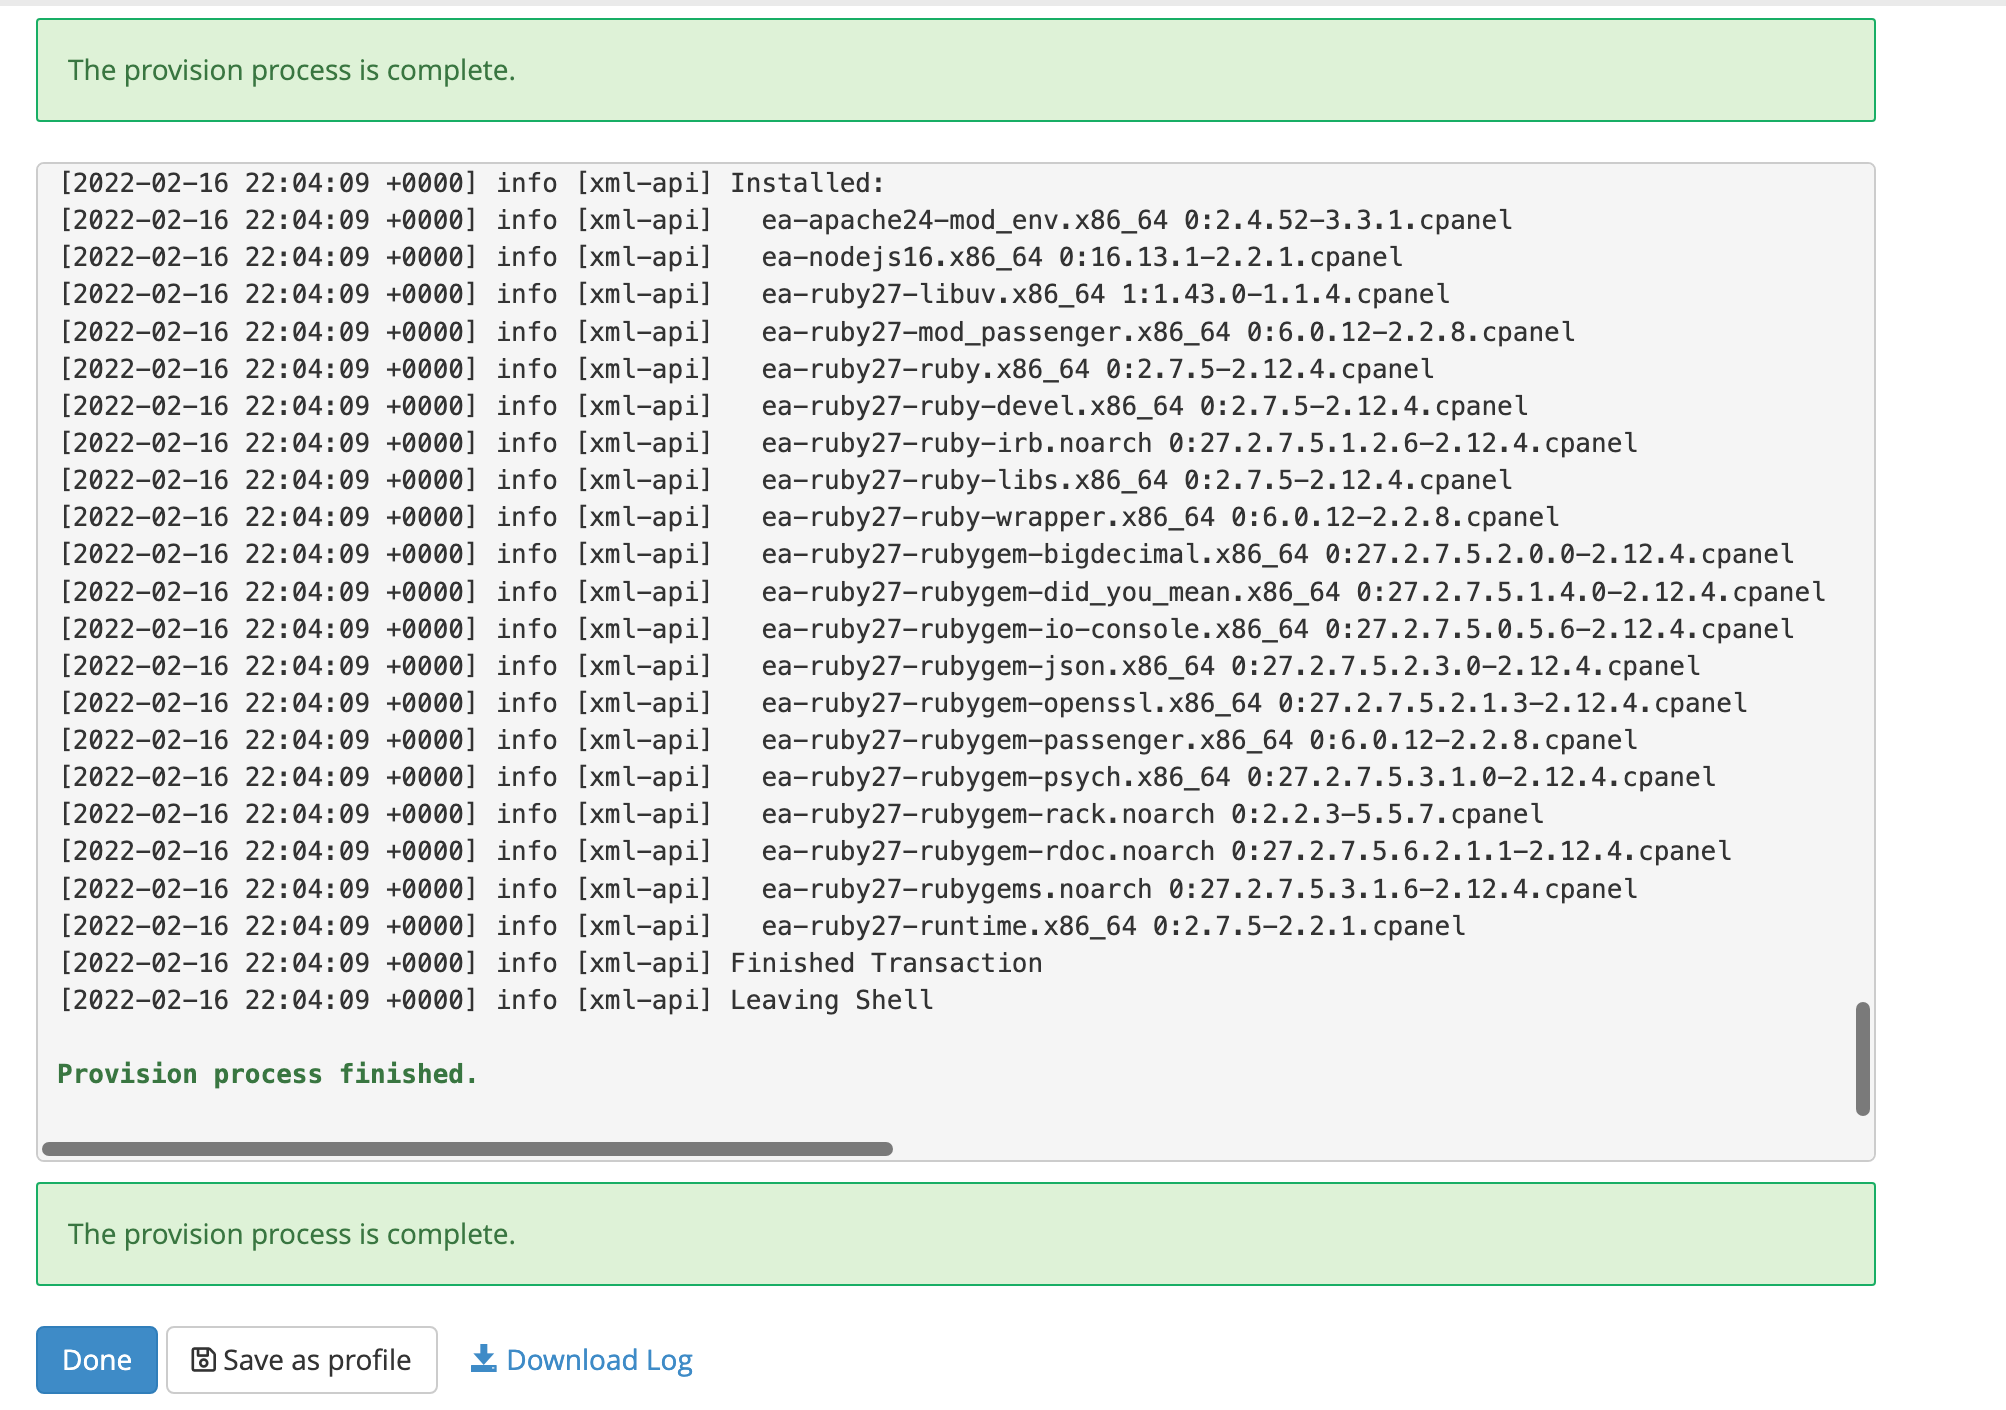 Screenshot of the Easy Apache UI after provisioning the selected packages